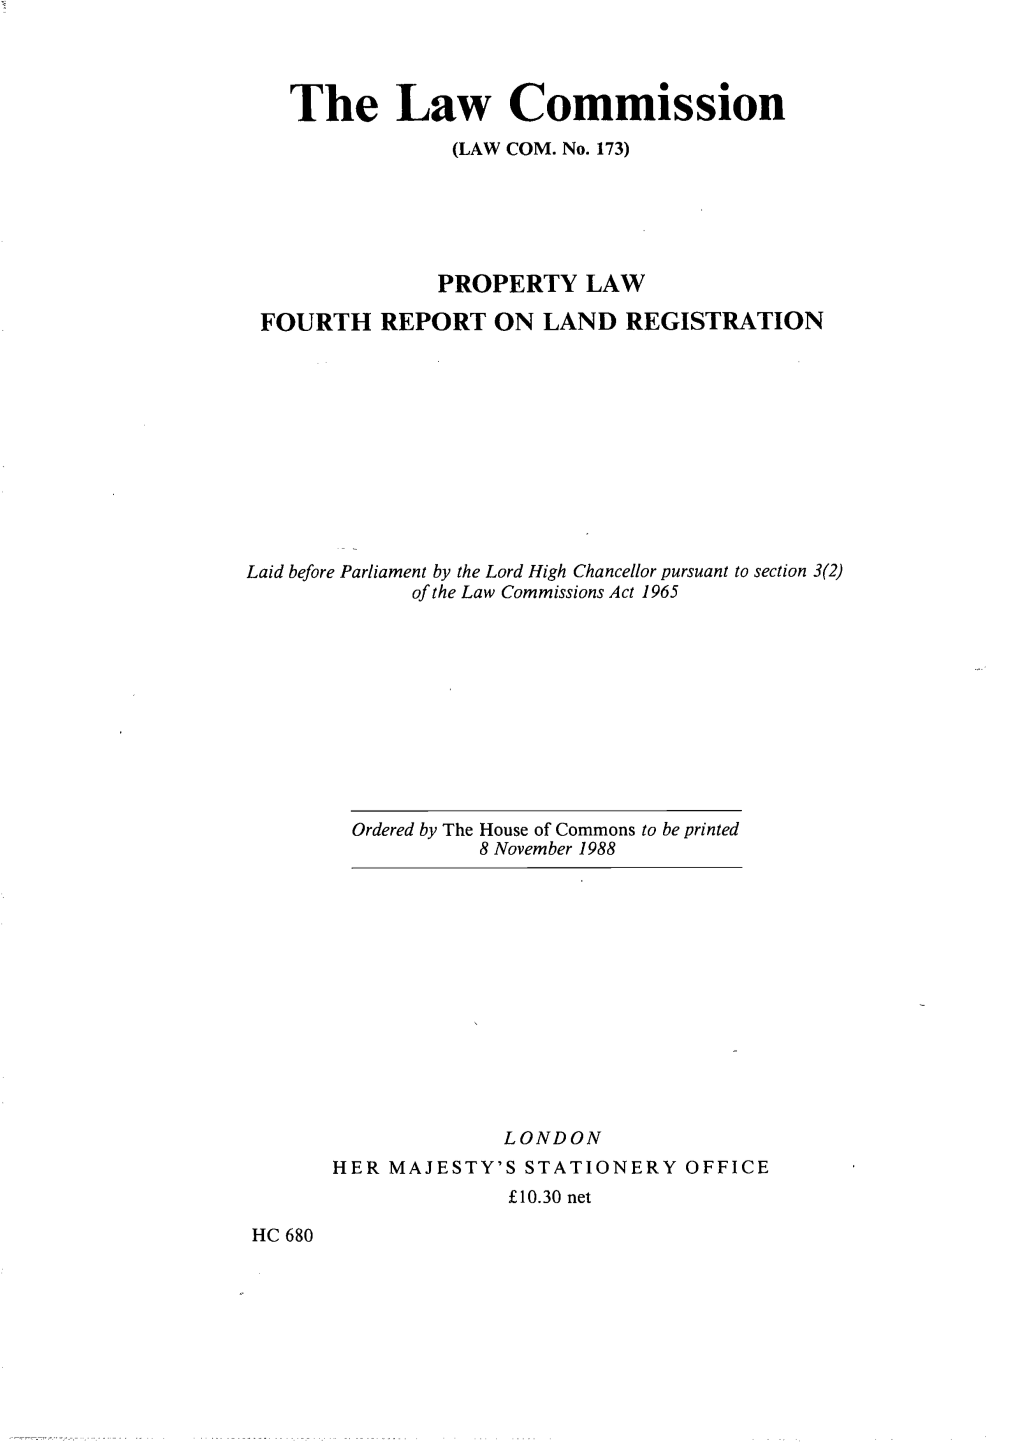 Property Law: Fourth Report on Land Registration Report